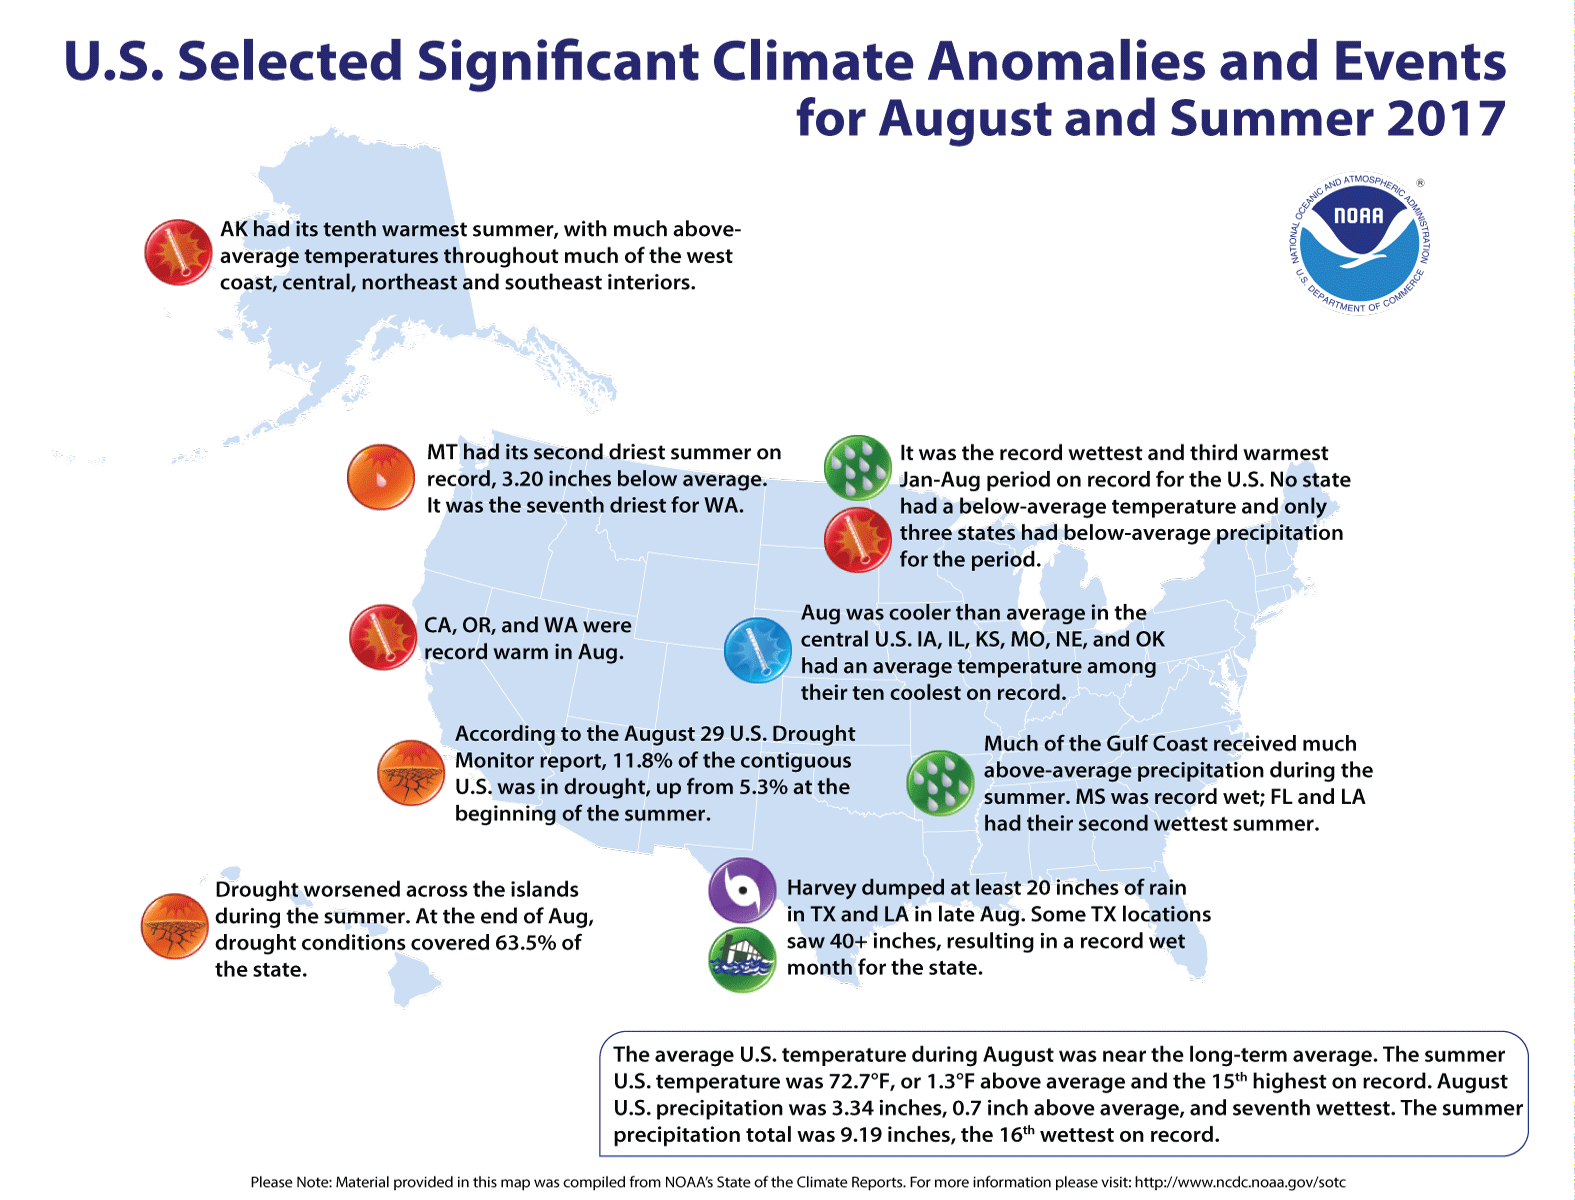 Significant climate events that occurred in the U.S. in August 2017.